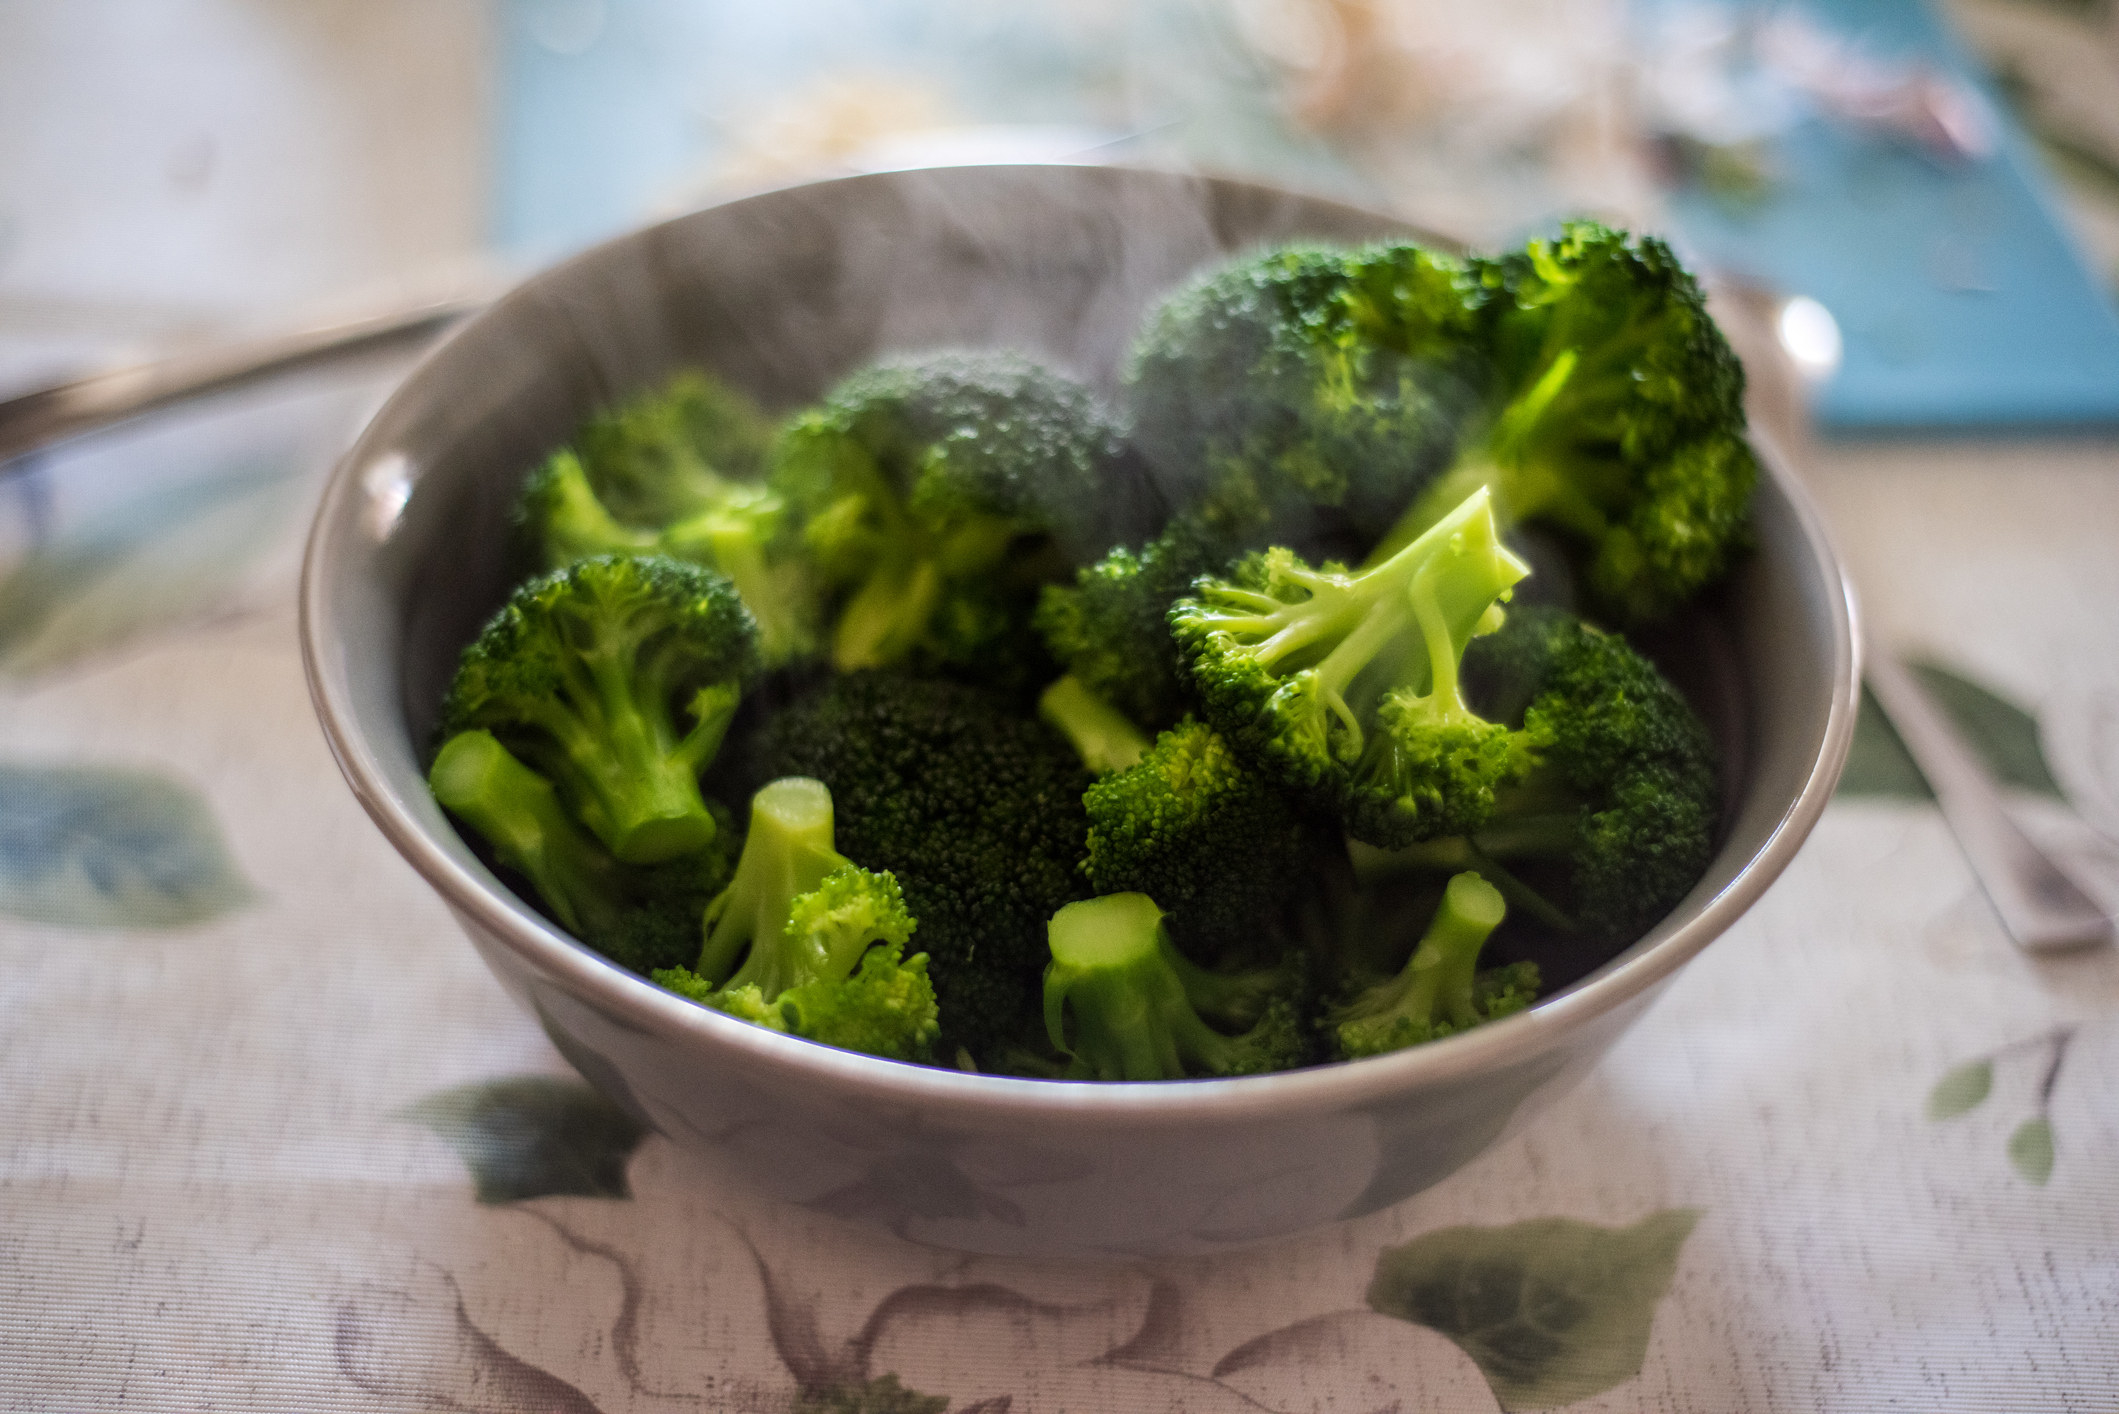 Cooked broccoli in a bowl.